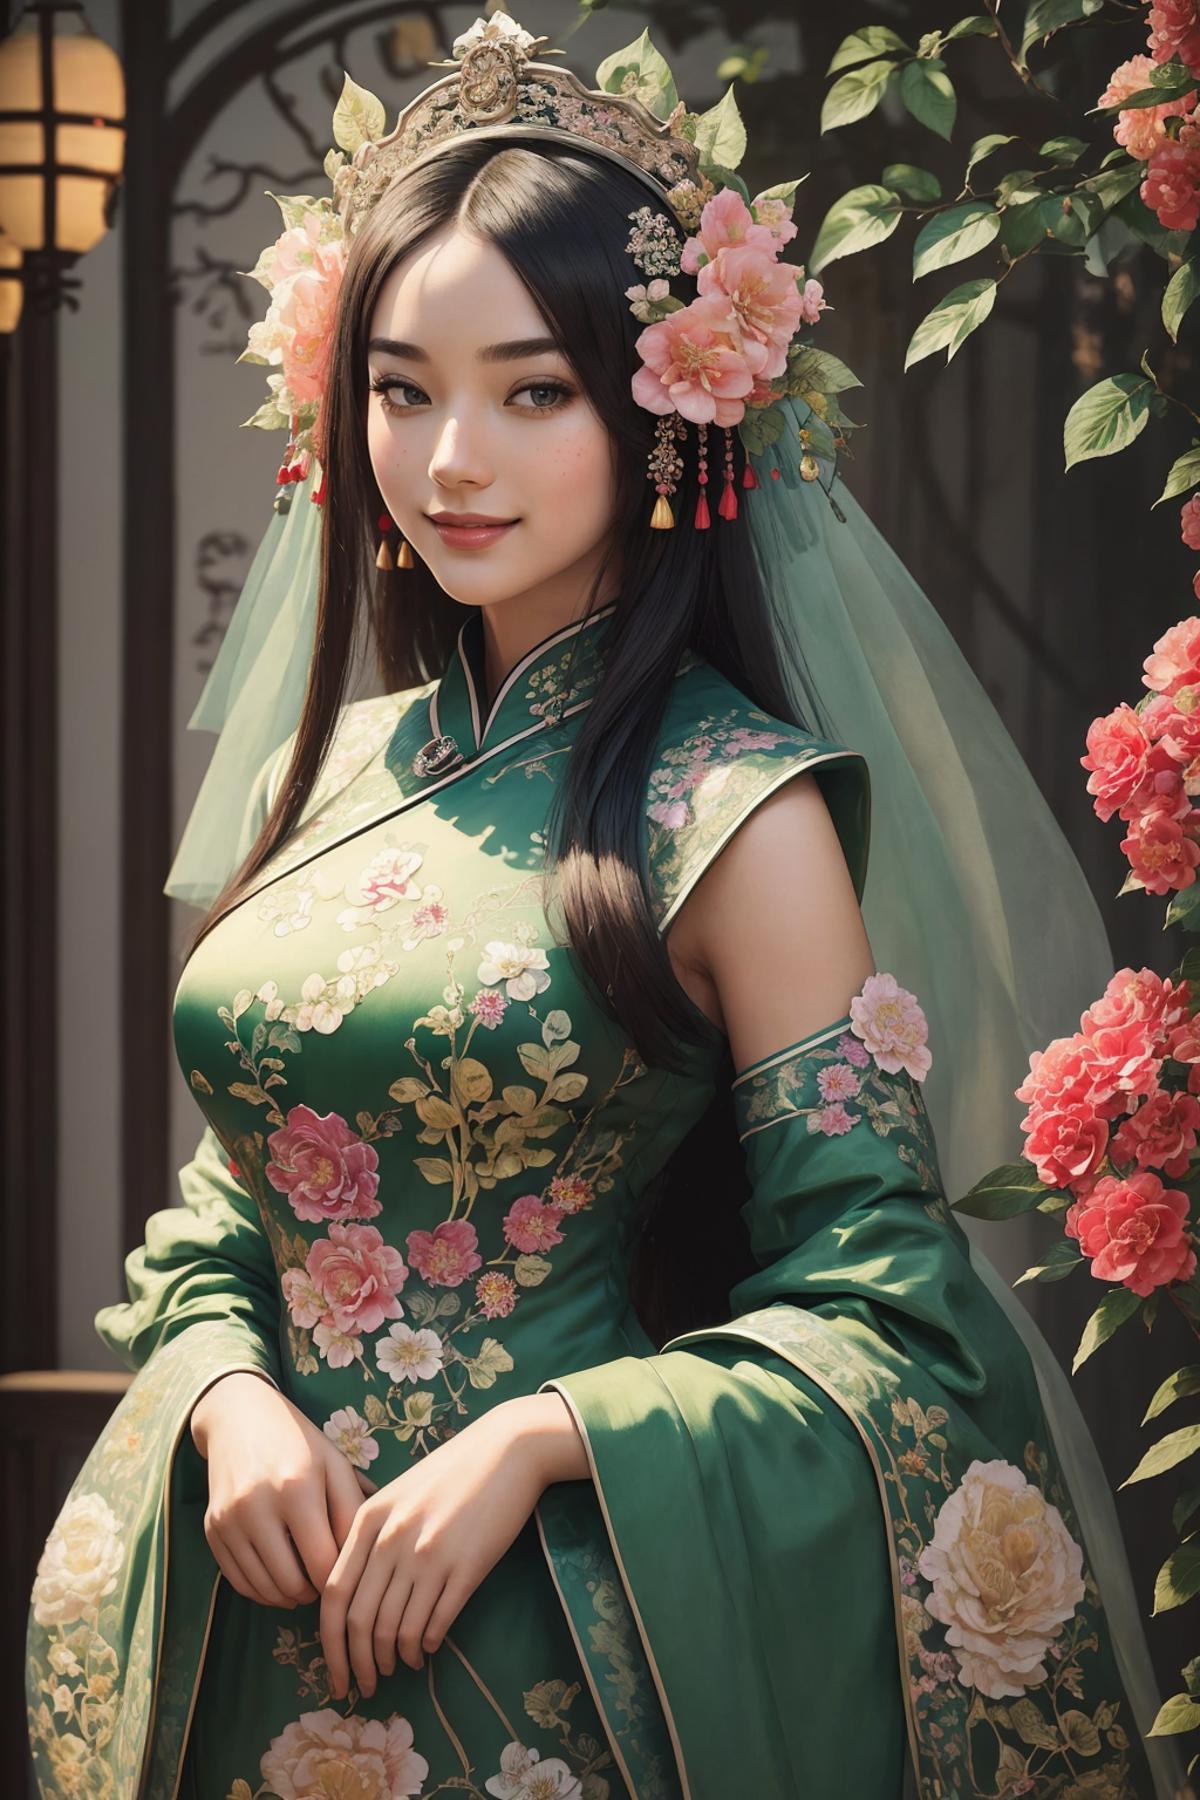 Eastern Fantasy - by EDG image by EDG